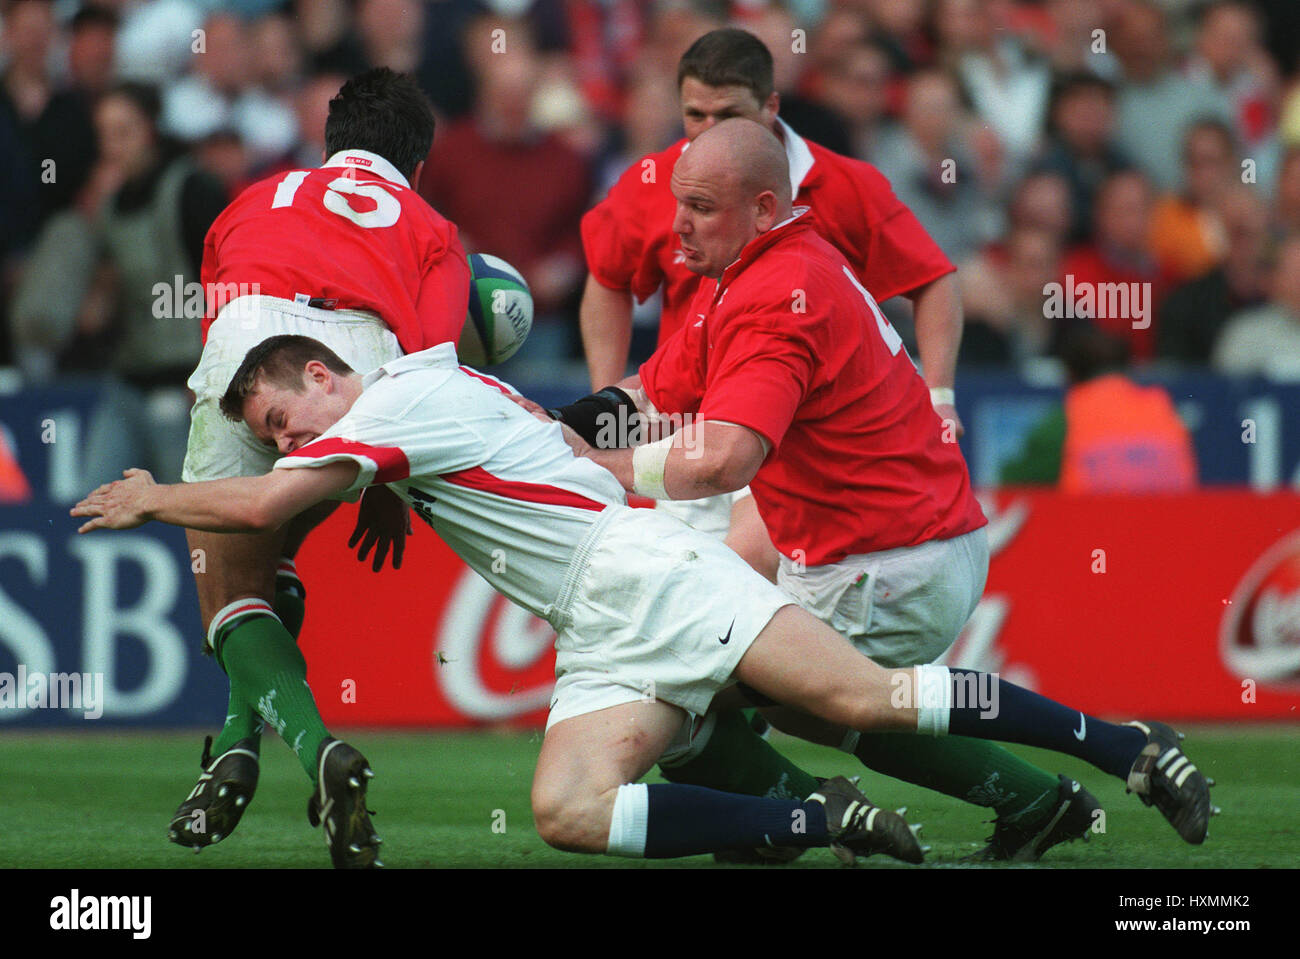 PERRY HOWARTH & CRAIG QUINNELL WALES V ENGLAND 11. April 1999 Stockfoto